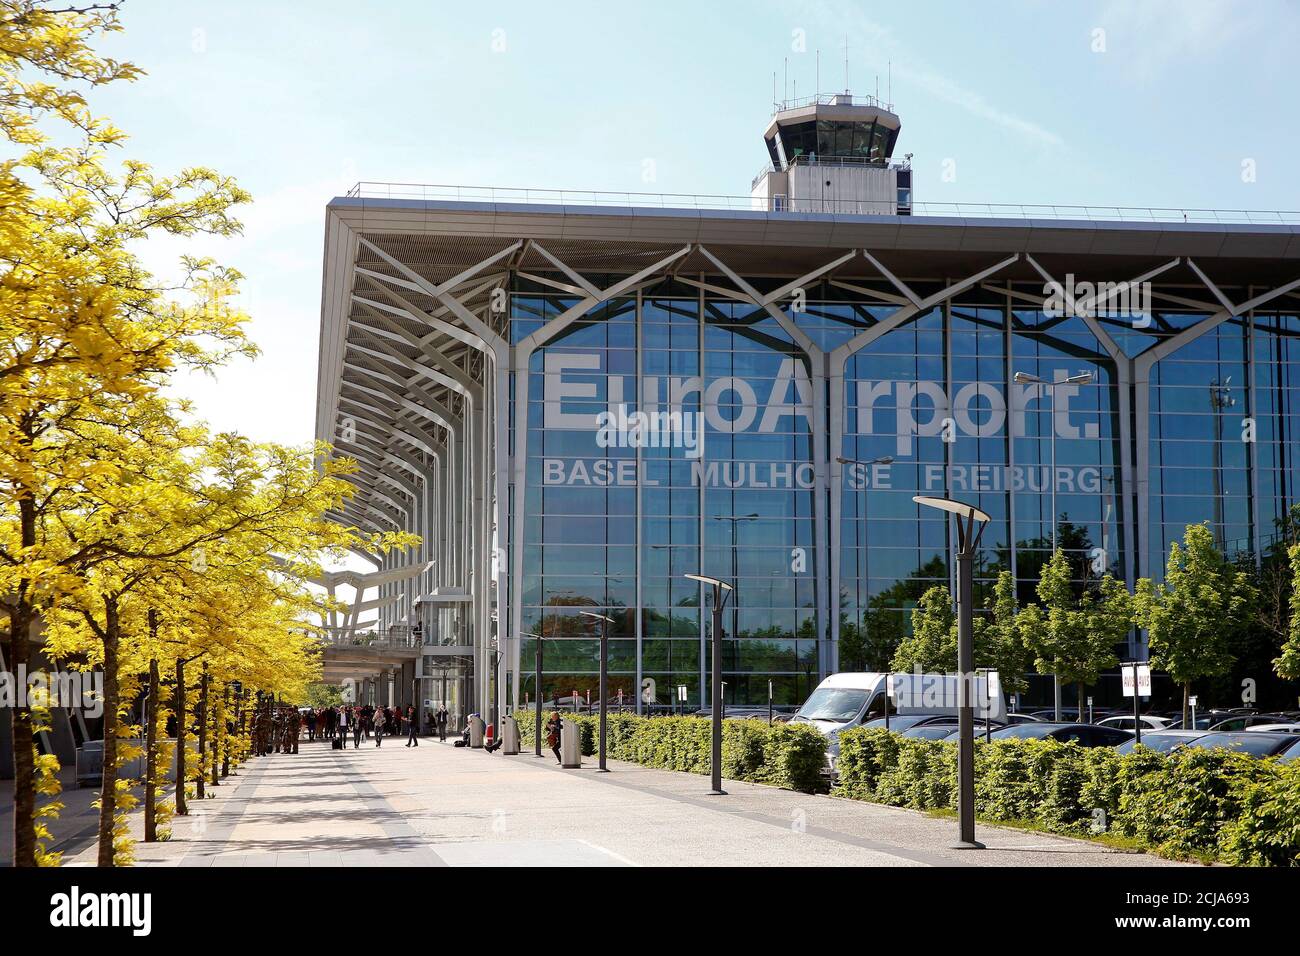 A general view shows the terminal of the Euroairport Basel-Mulhouse-Freiburg  near the town of Saint-Louis, France May 18, 2016. REUTERS/Arnd Wiegmann  Stock Photo - Alamy